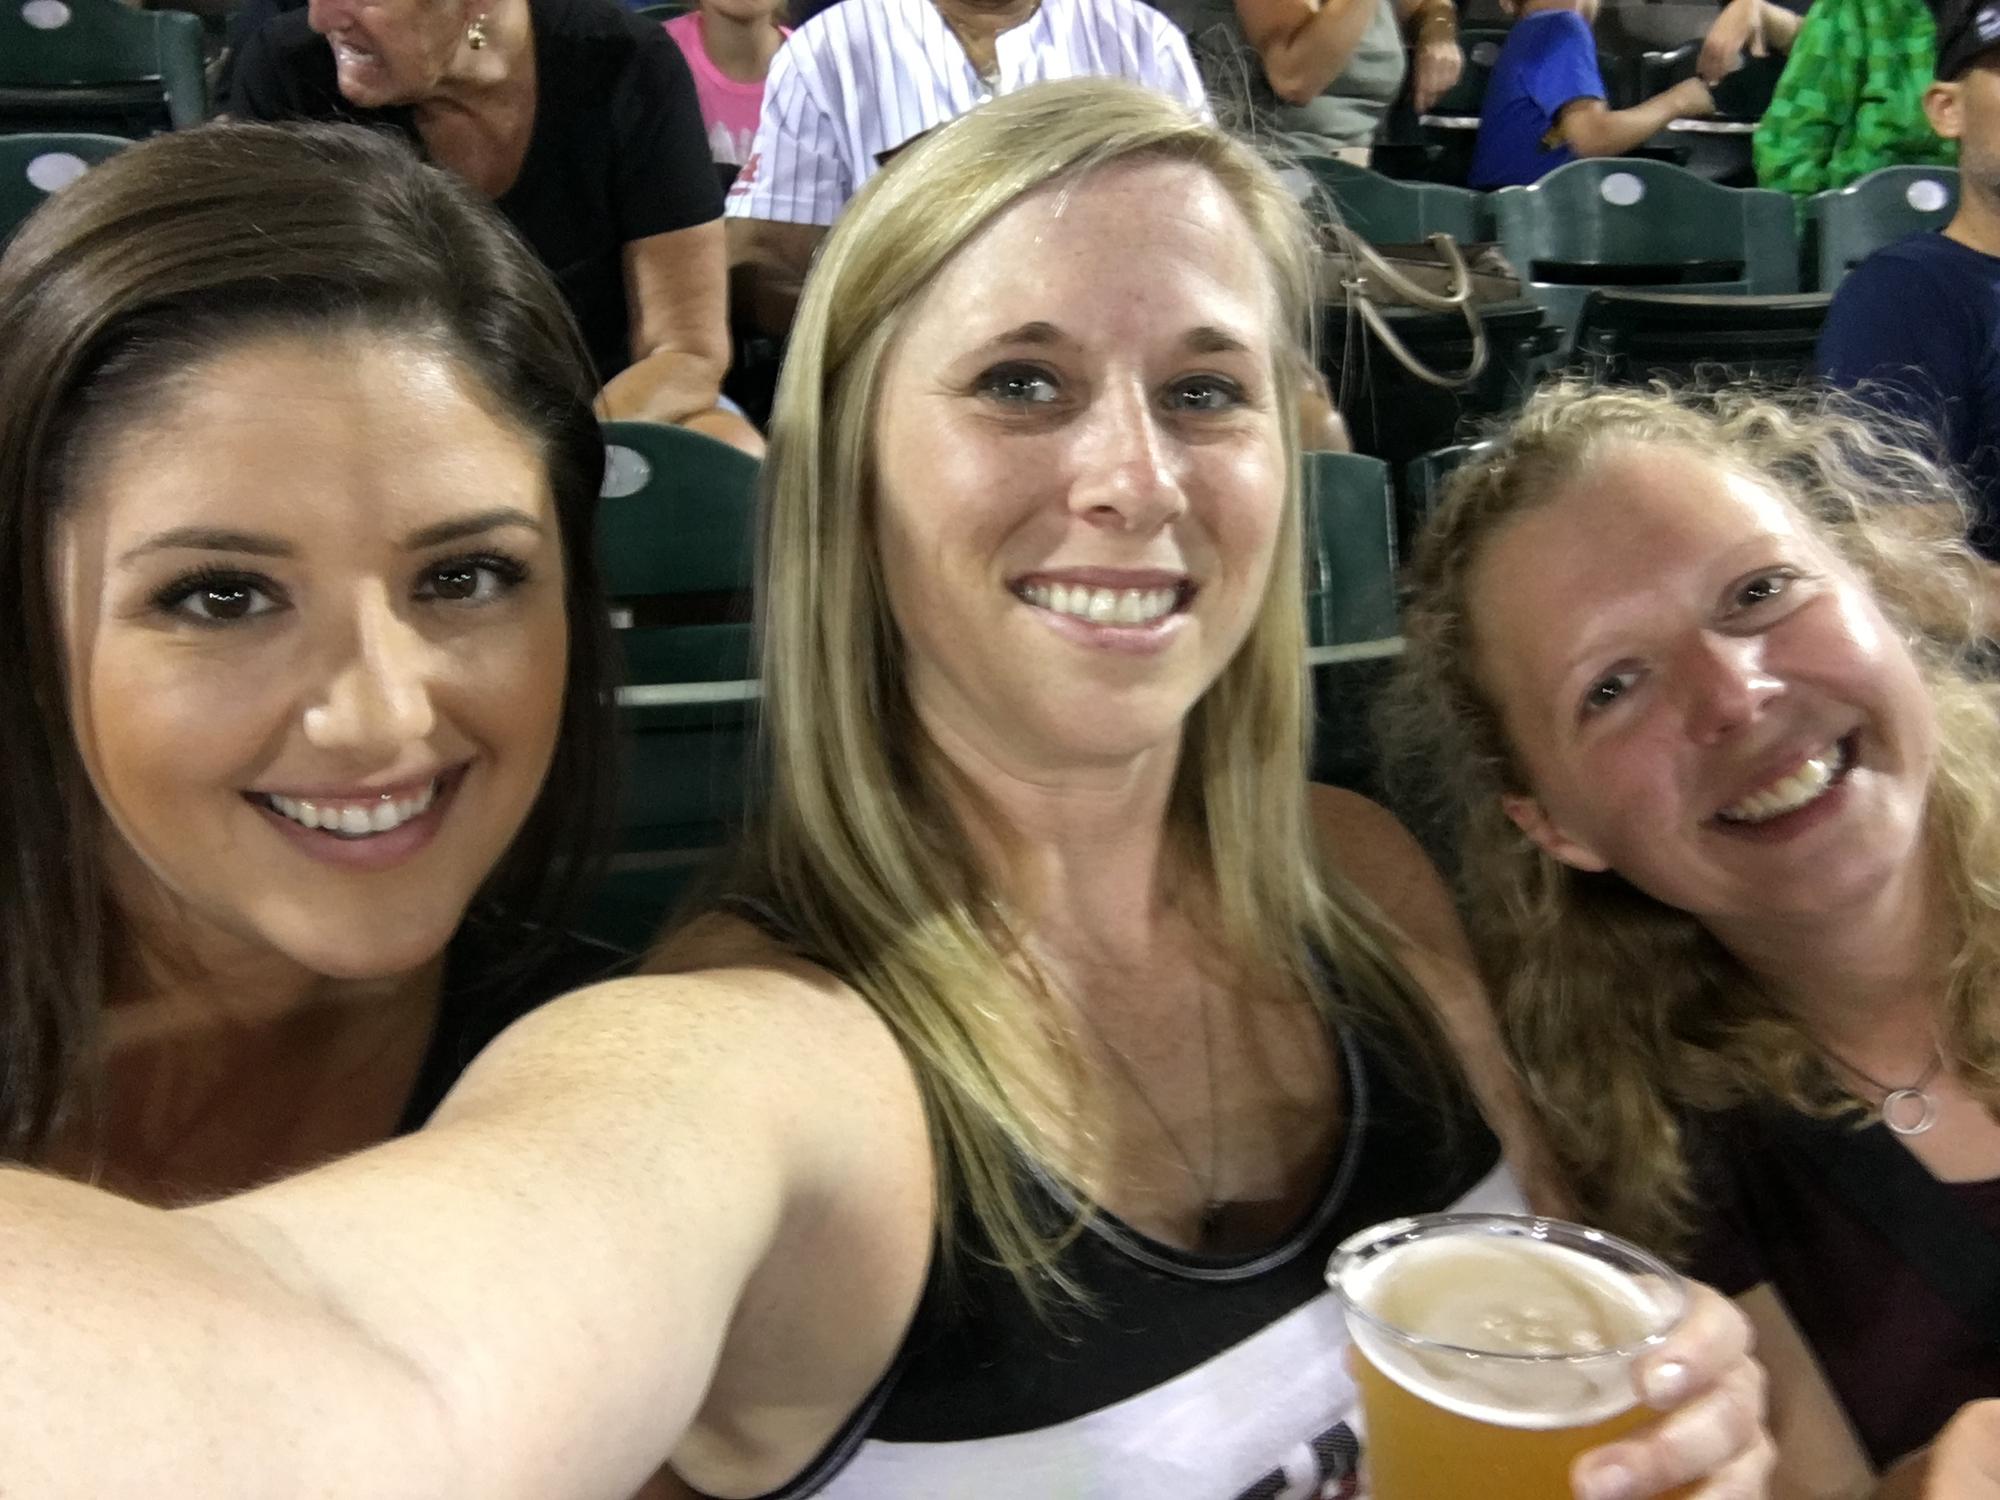 Caeli, Kimmy and Josephine having beers at a River Cats baseball game